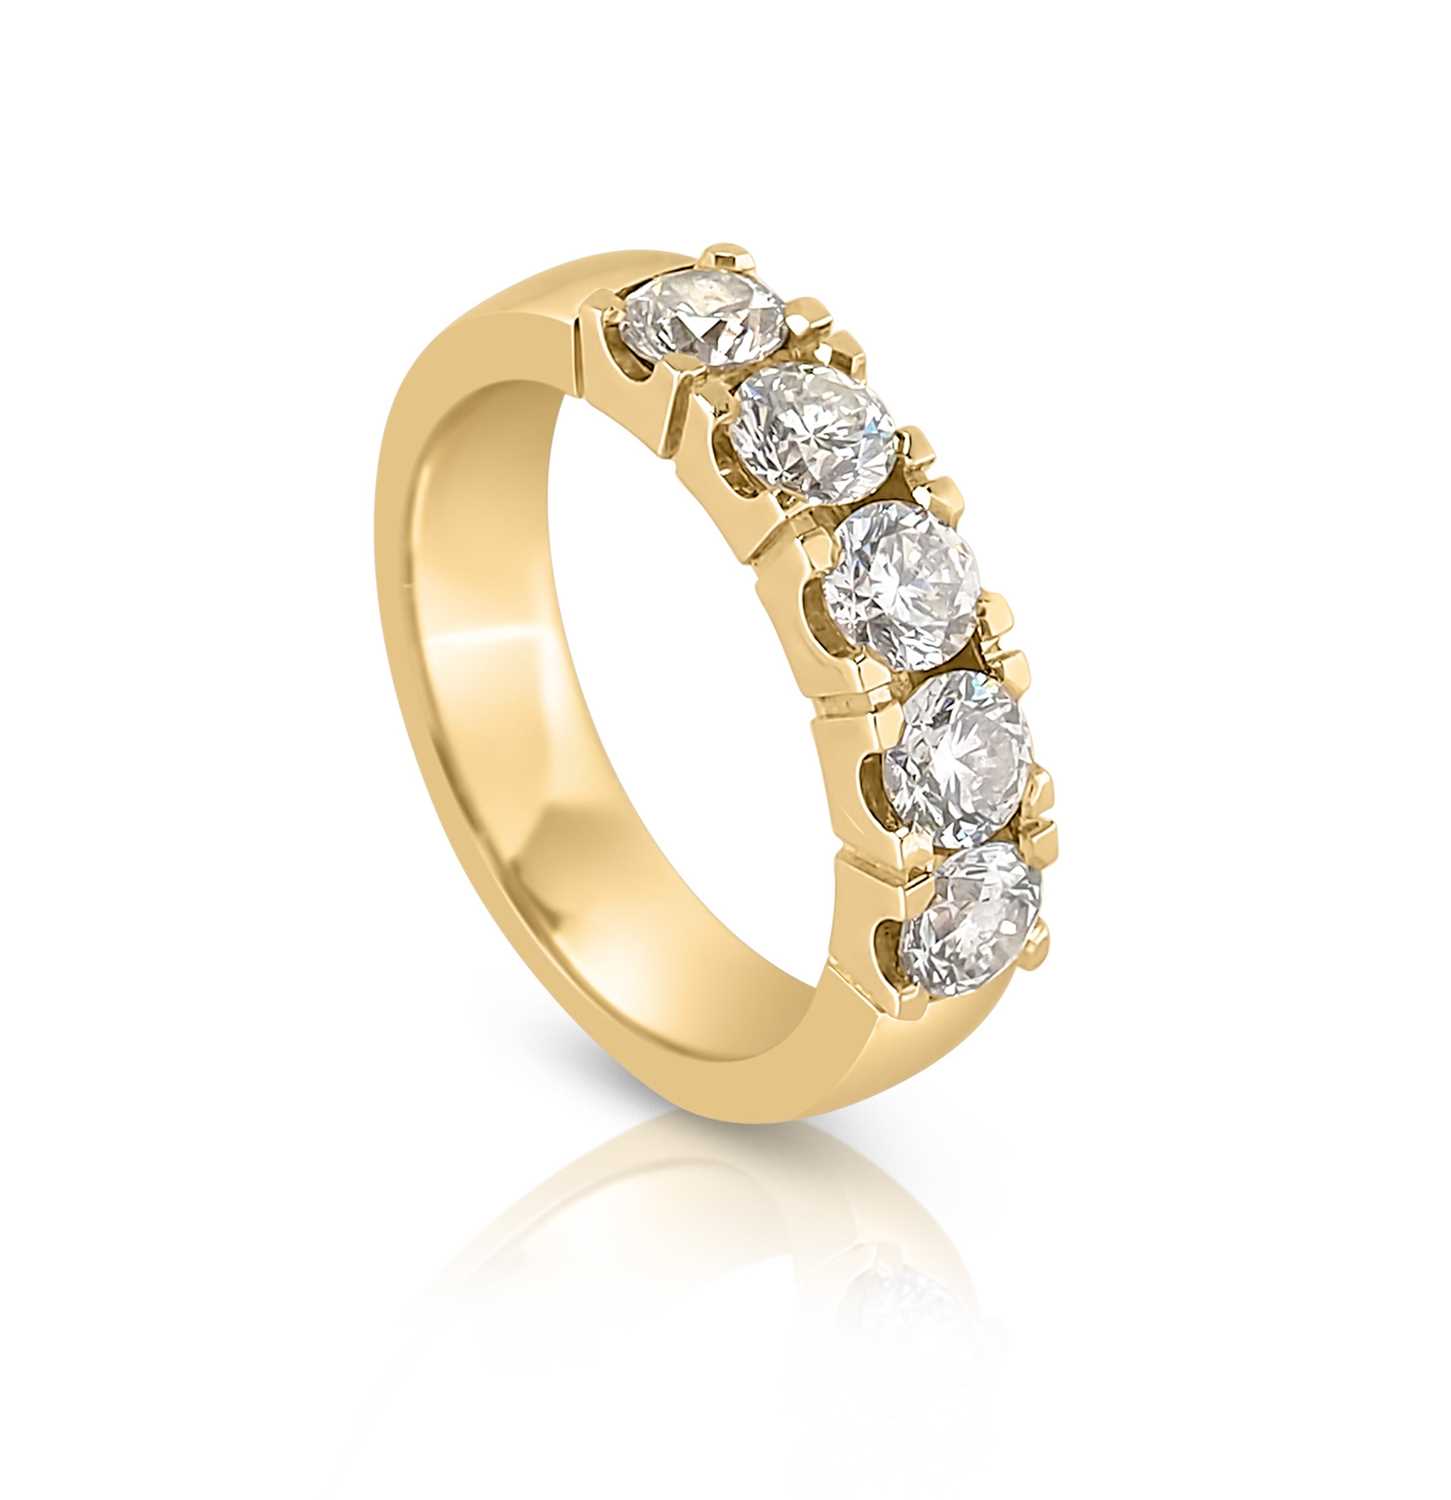 Lot 50 - Gold Ring with Diamonds